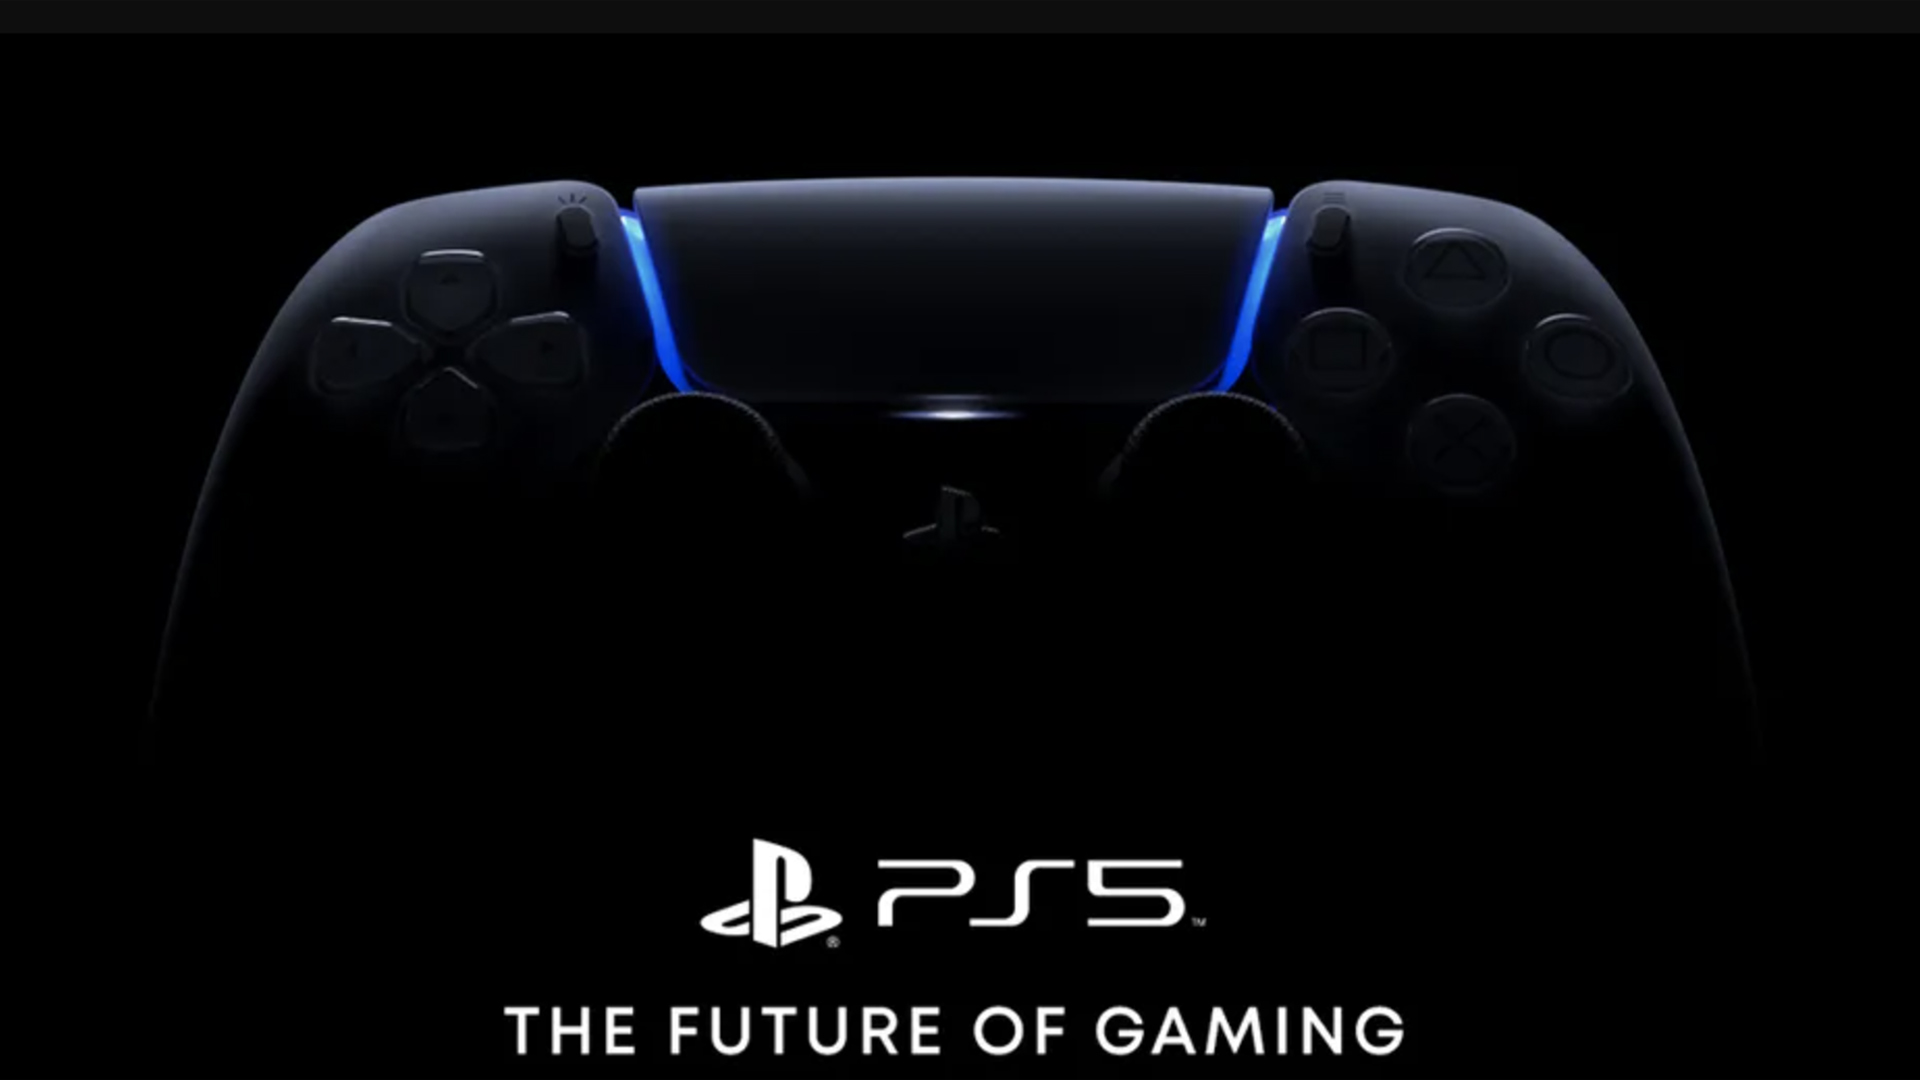 New date for PS5 Future of Gaming event coming "soon", promises Sony